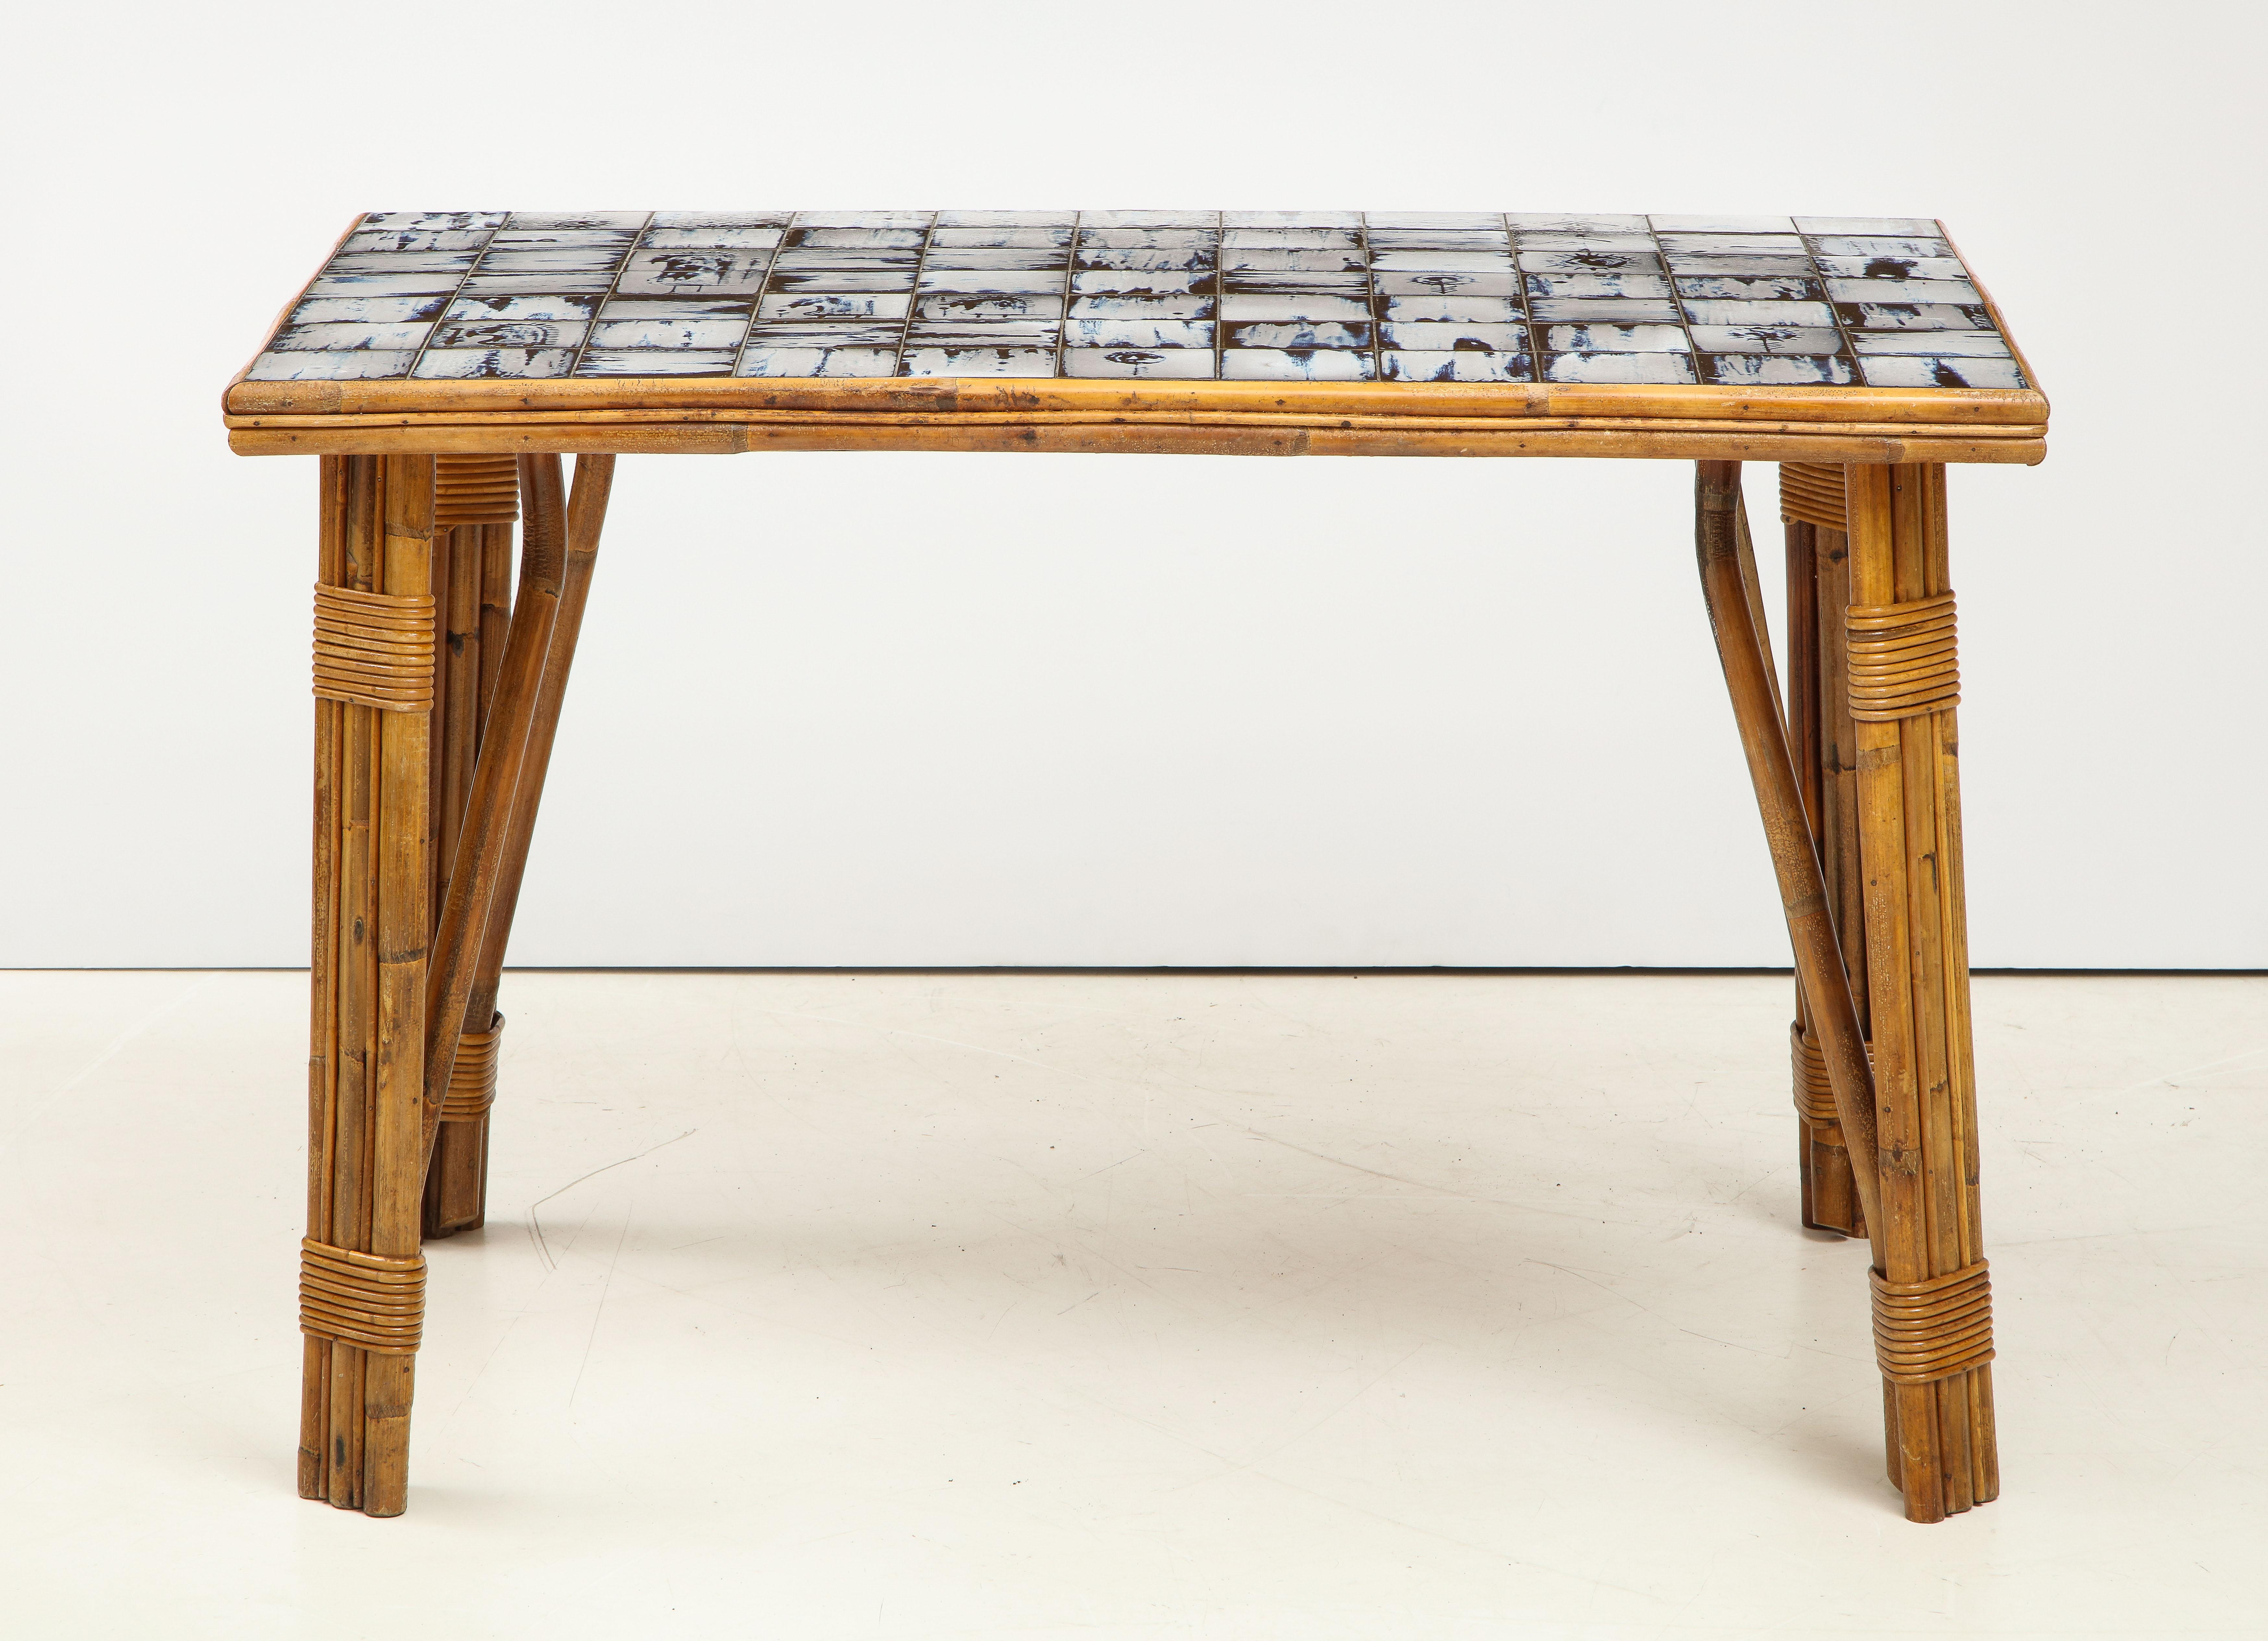 Mid-century rattan dining table with a stunning hand-painted ceramic tile top, France, c. 1950s.

Table consists of rattan-wrapped legs, a tripart edge, and an inlaid ceramic tile top with a gorgeous blue and white painterly design.